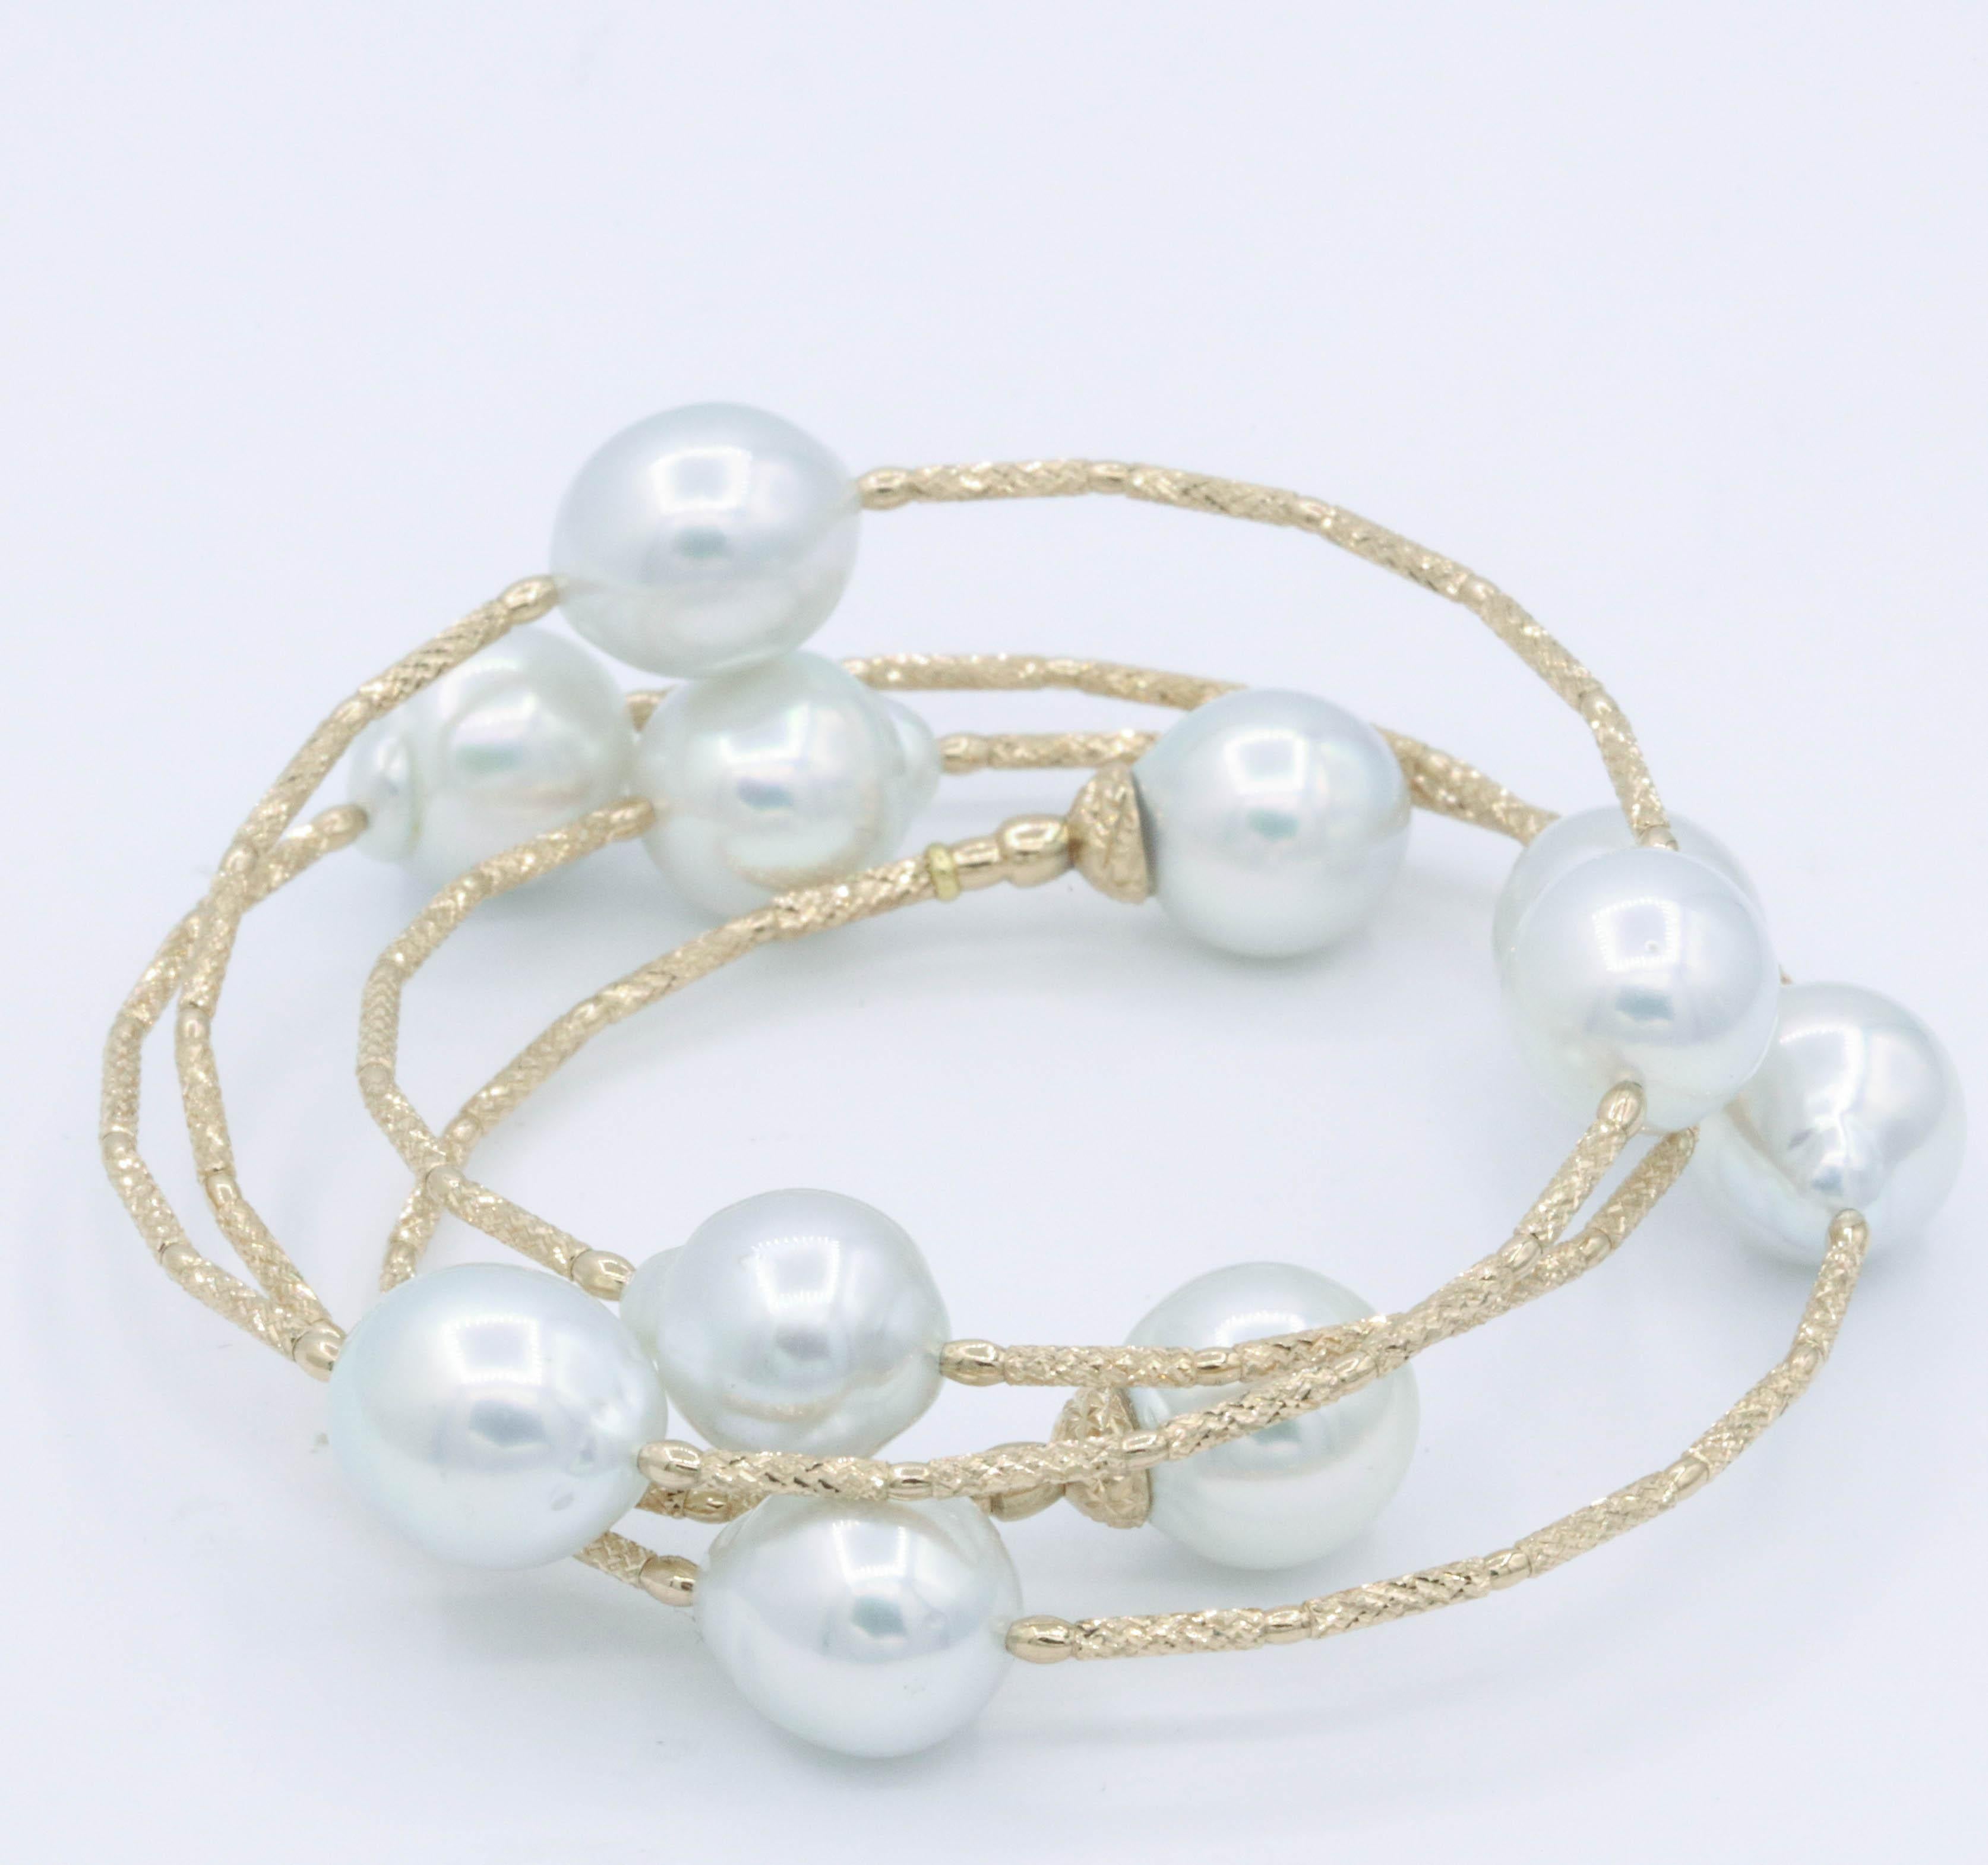 18K Yellow Gold
11 South Sea Pearls each 9.0 mm +
Perfect for any size wrist